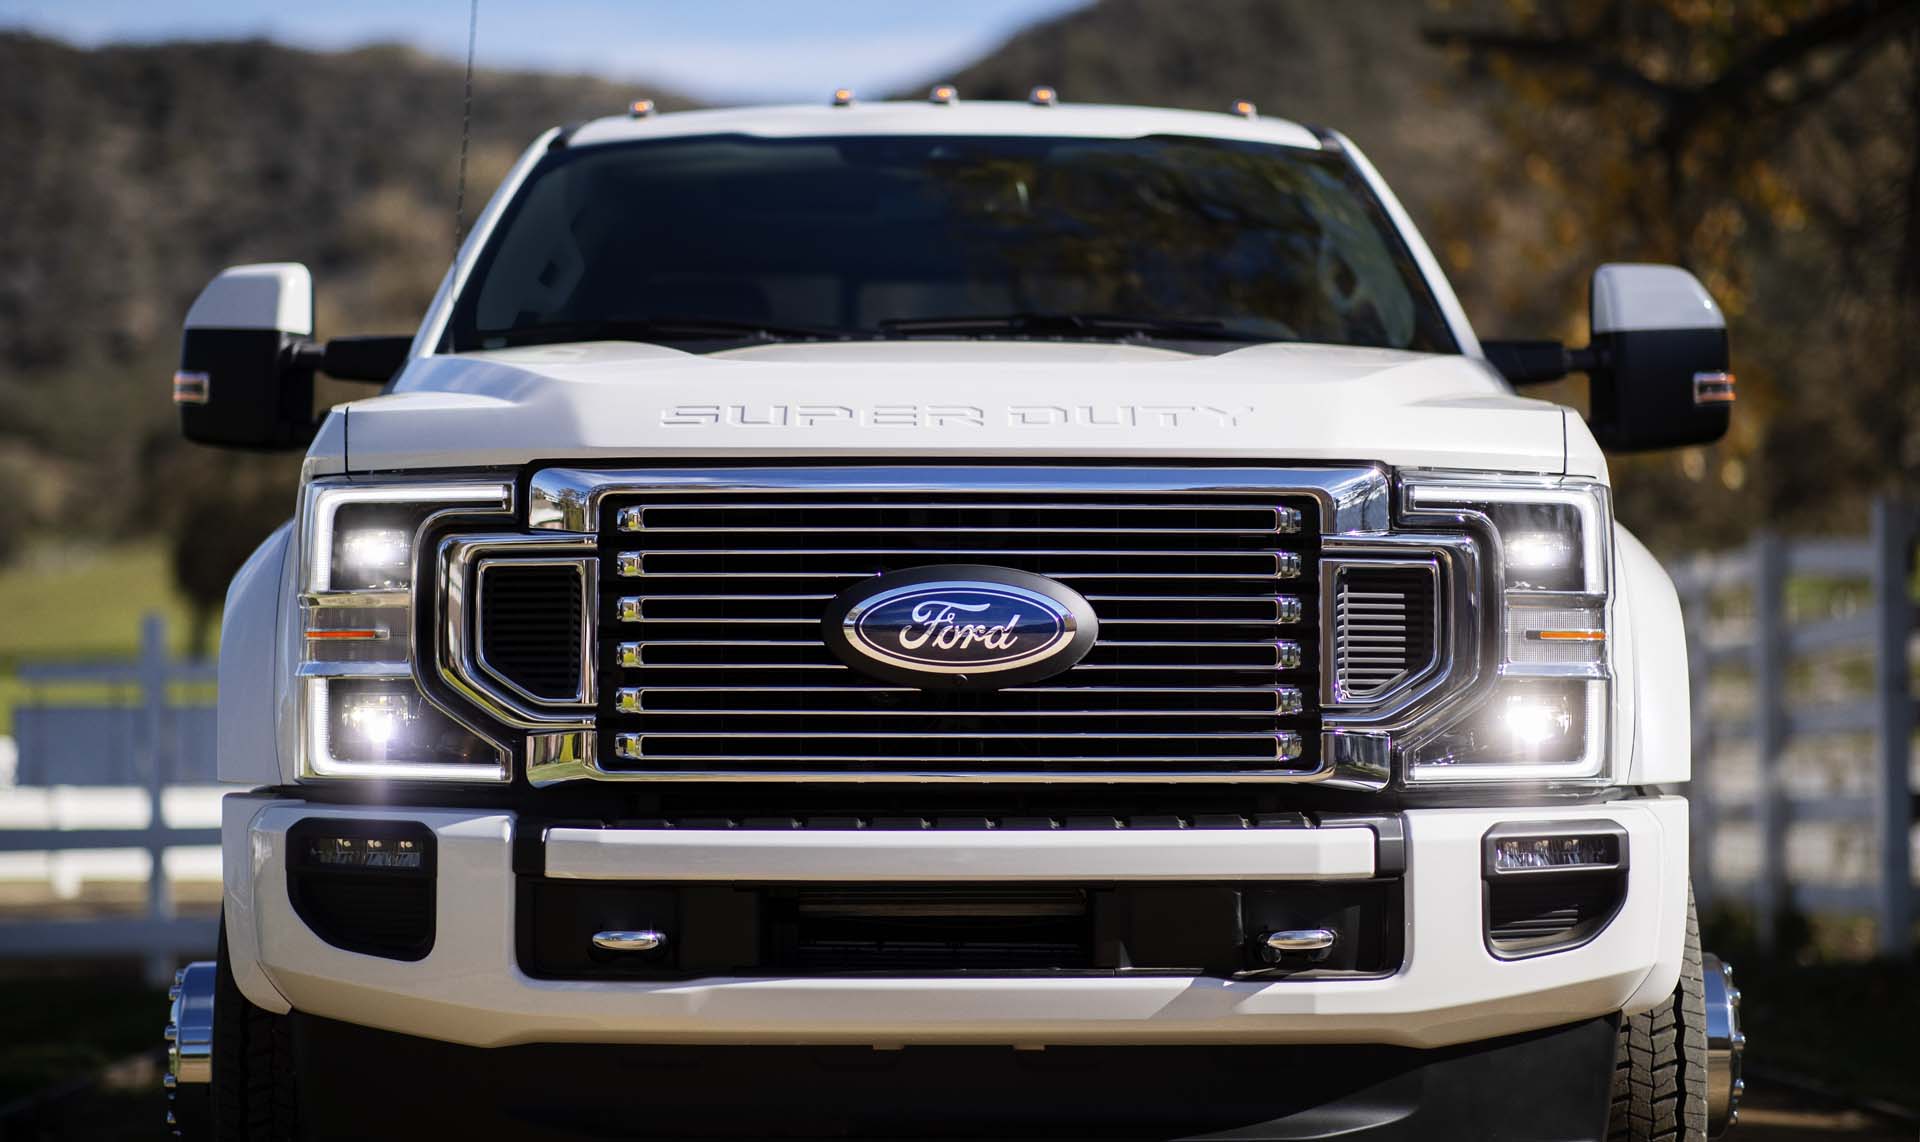 2020 Ford F-250 Super Duty revealed: More power, more gears, more tech